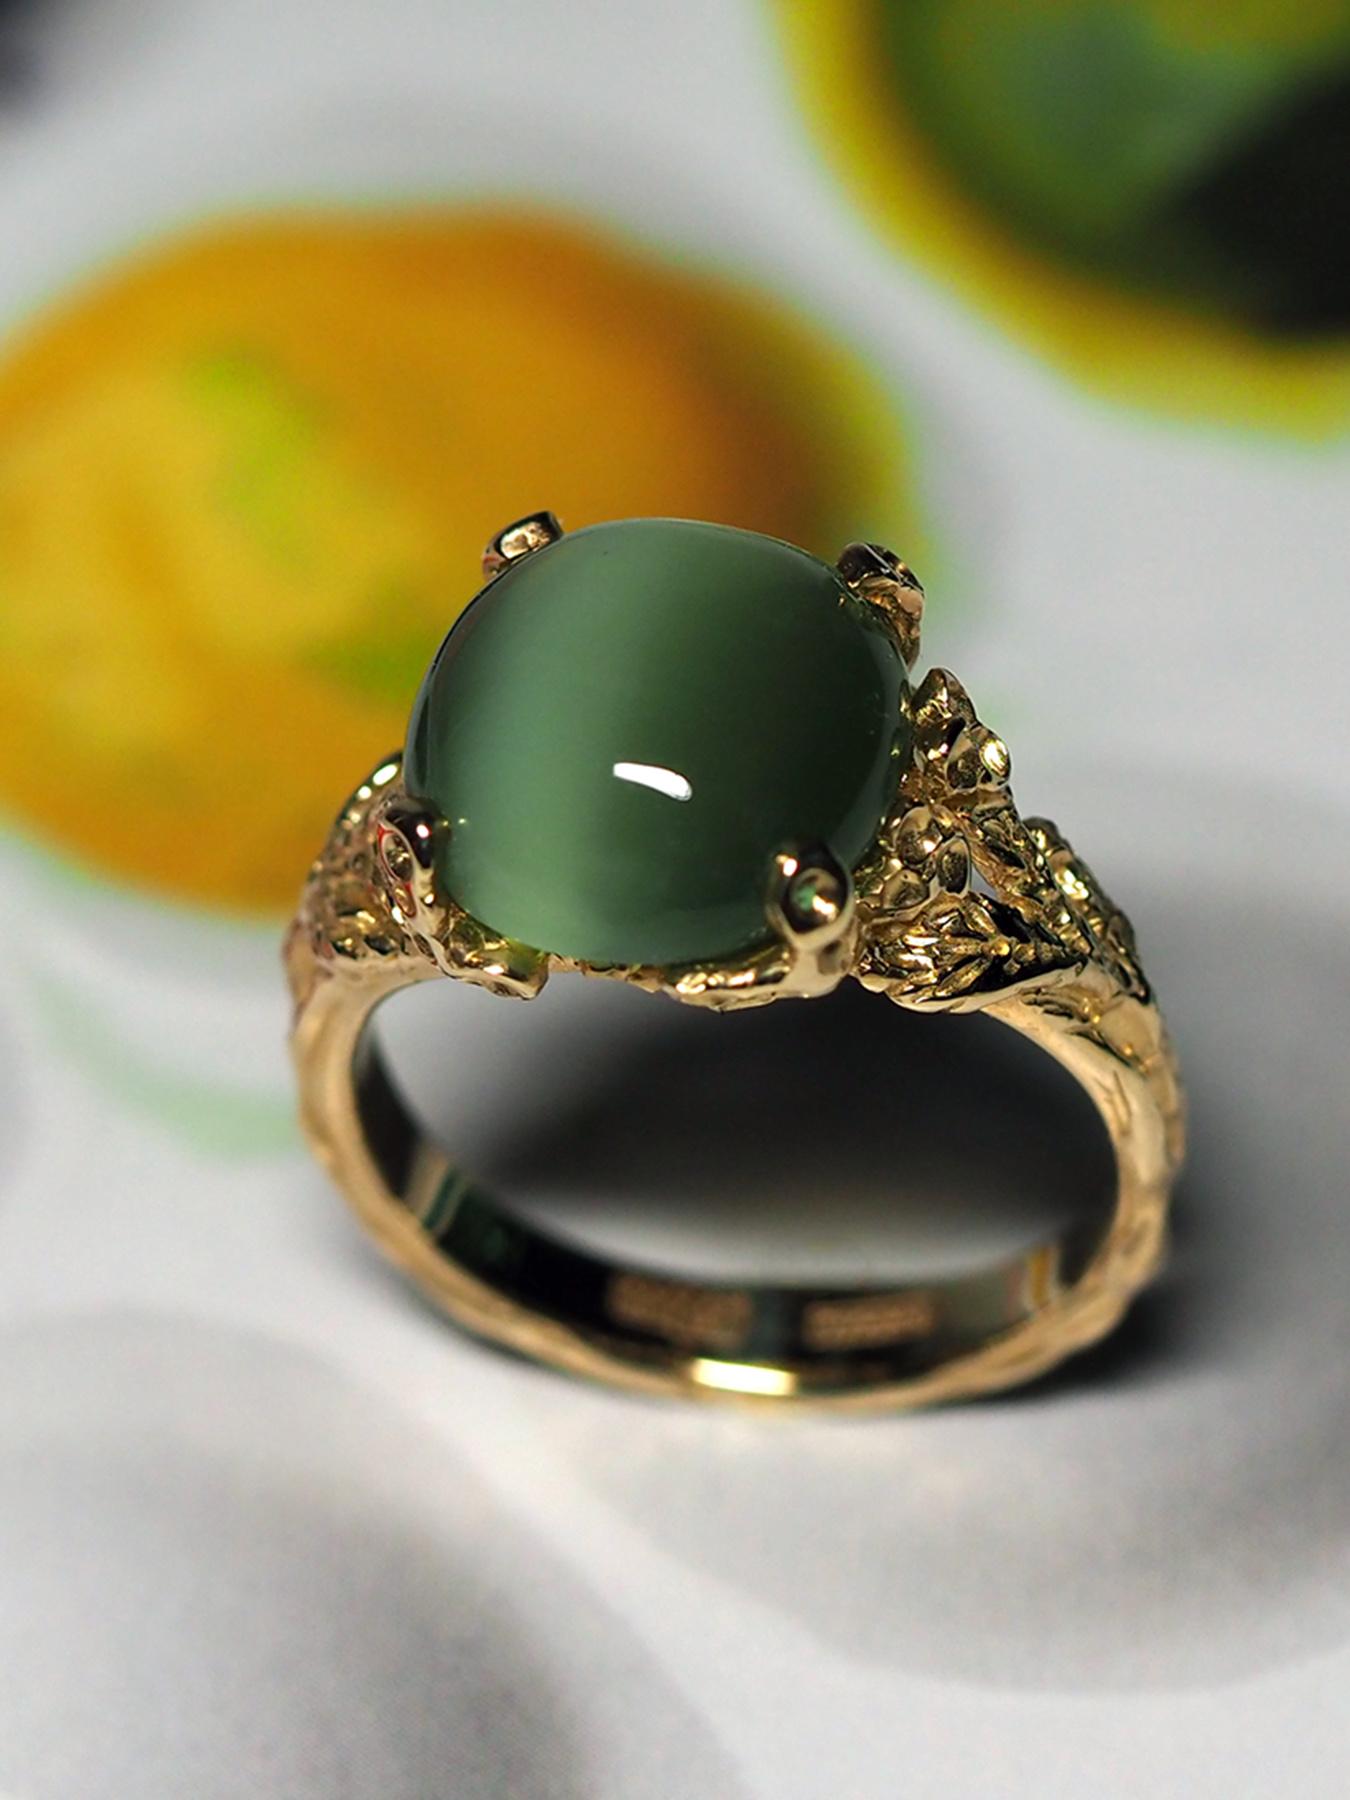 Cabochon Nephrite Jade Gold Ring Green Cats Eye Effect Chatoyancy Art Nouveau style For Sale